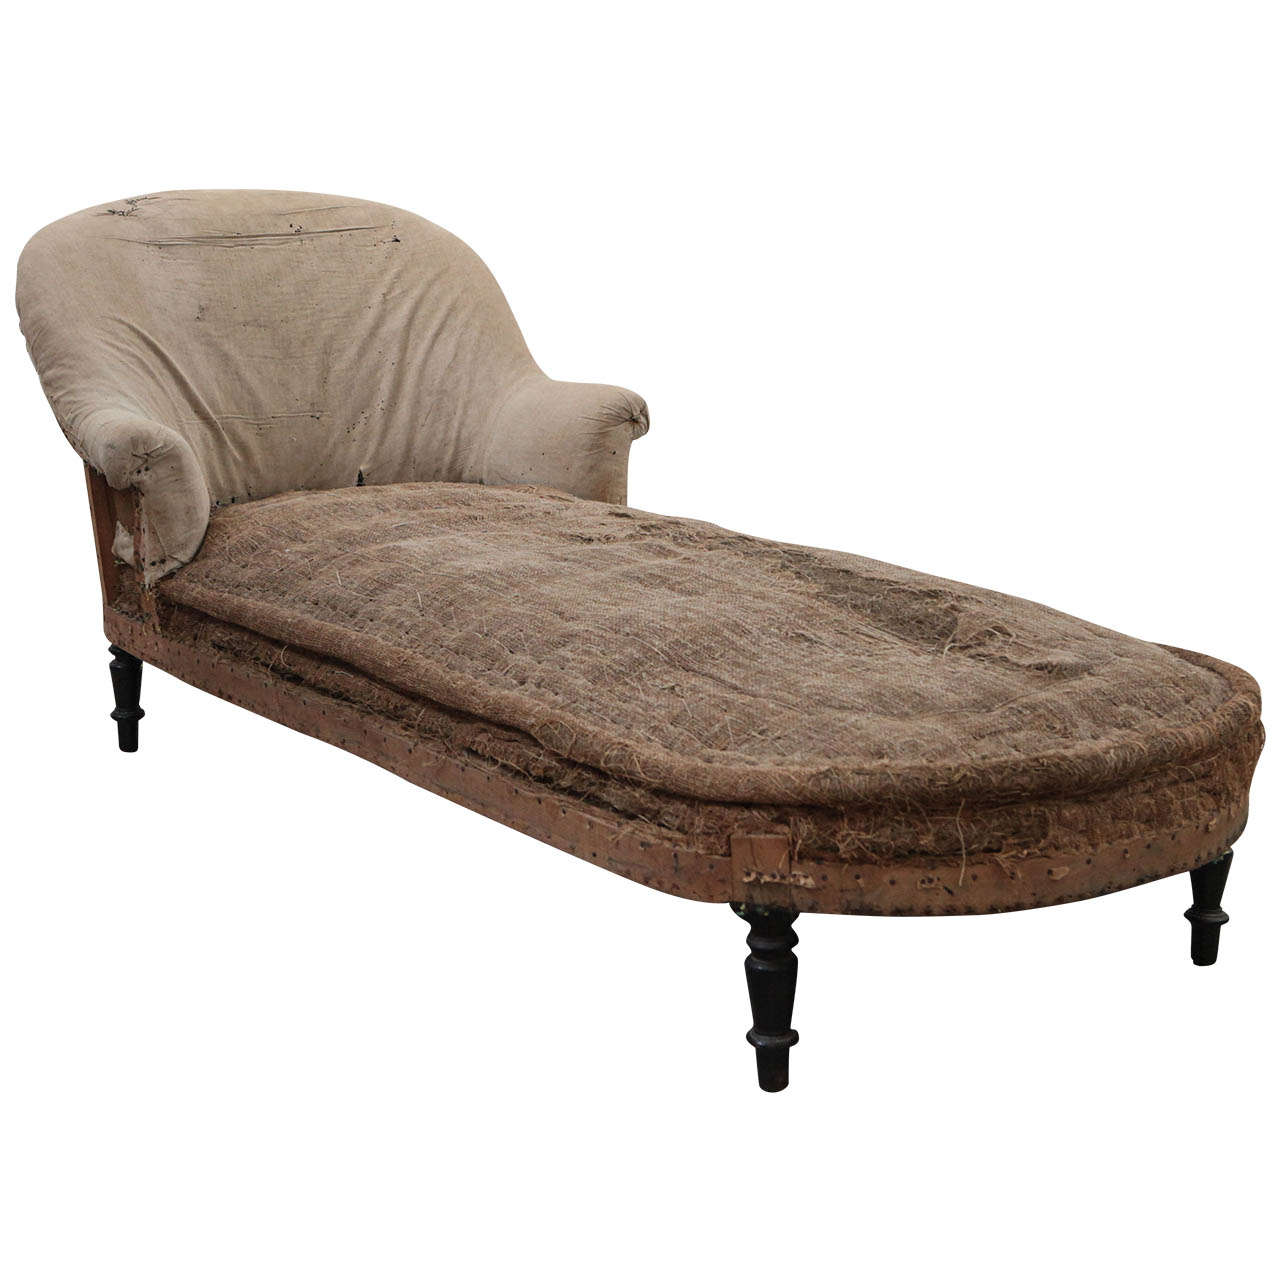 Large French Chaise, Late 18th Century